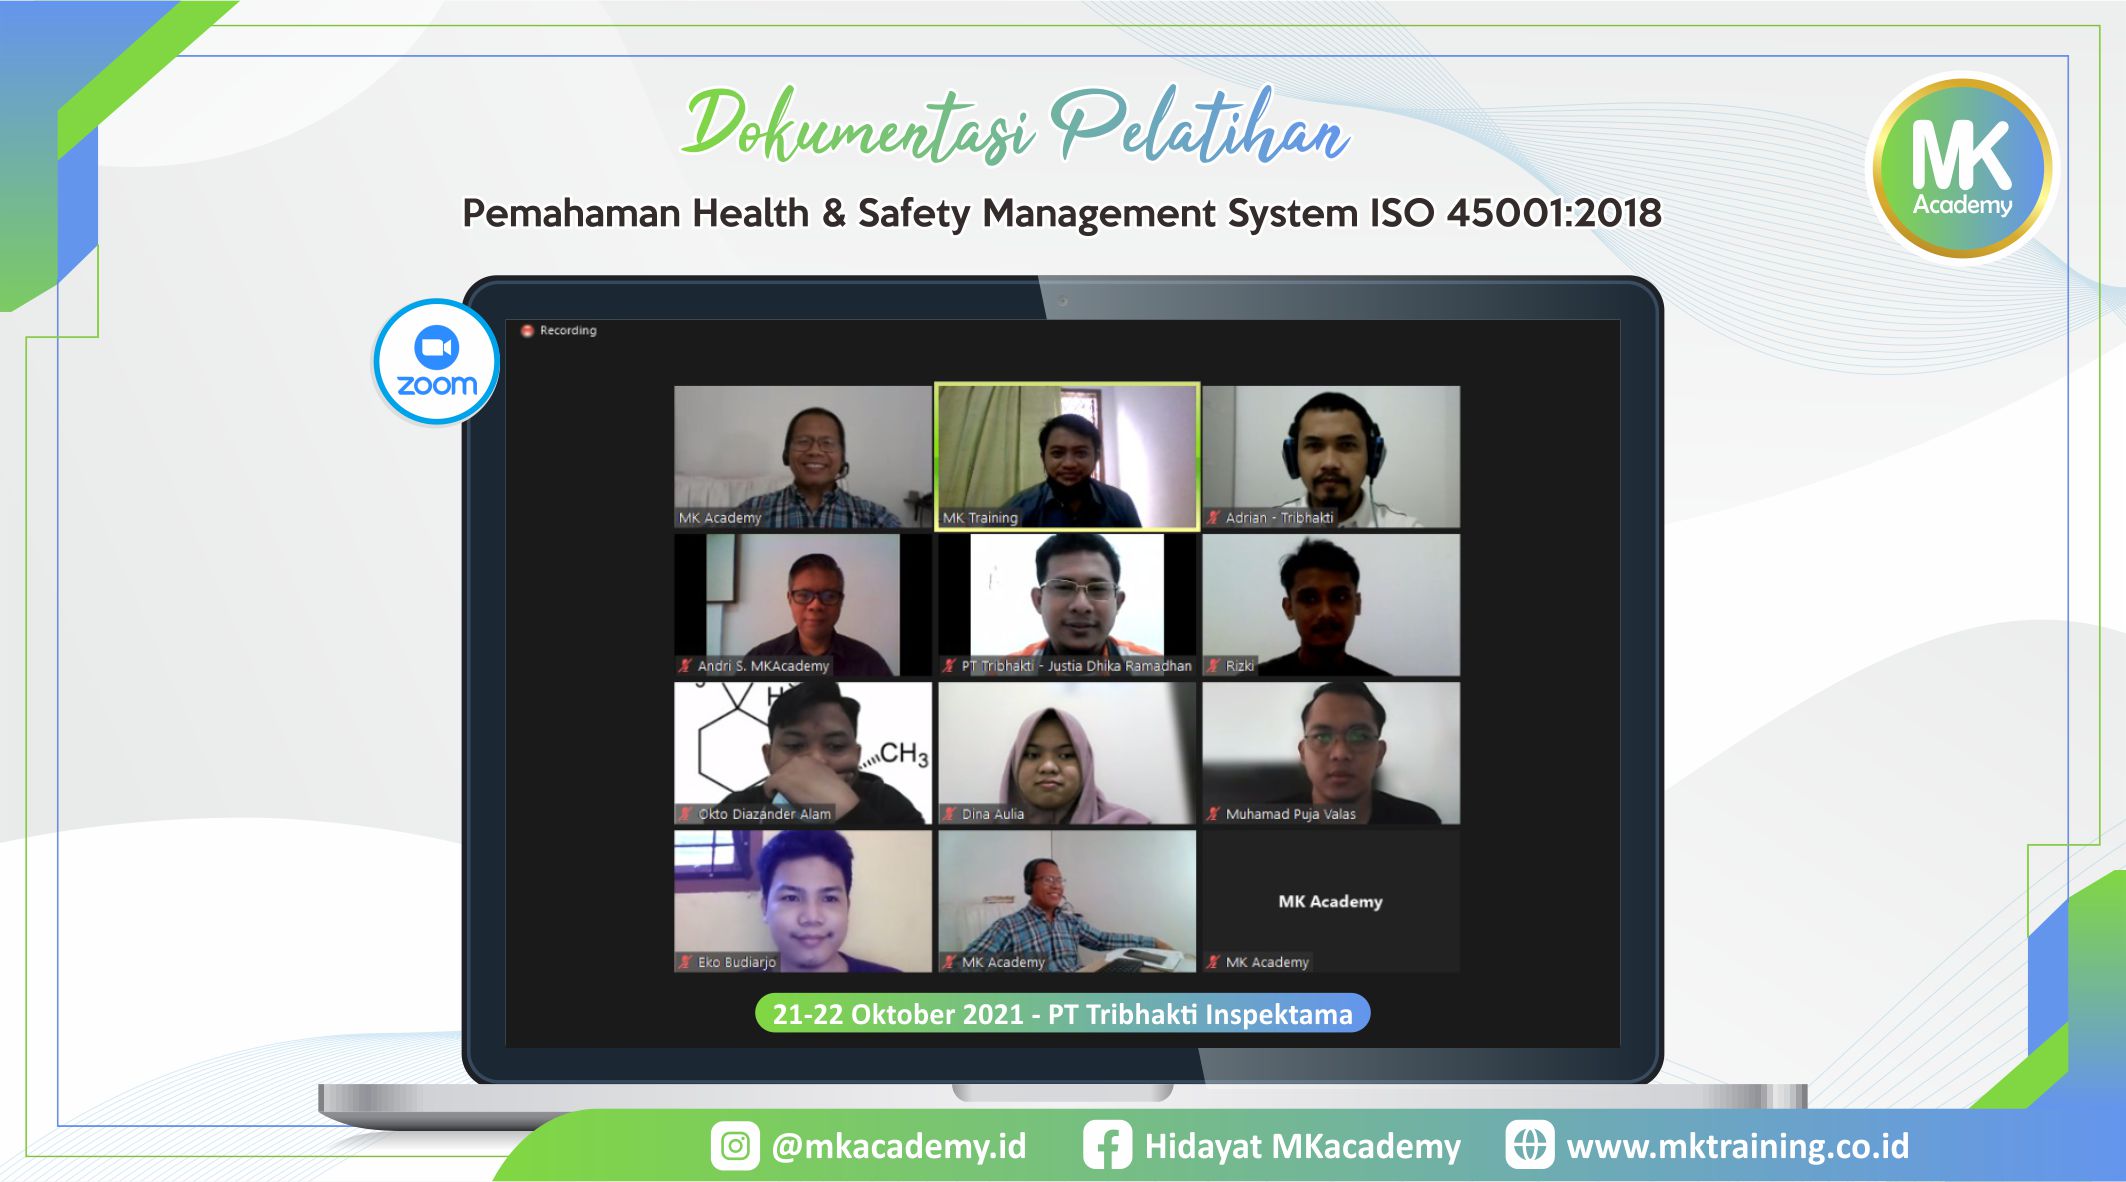 Pemahaman Health & Safety Management System ISO 45001:2018